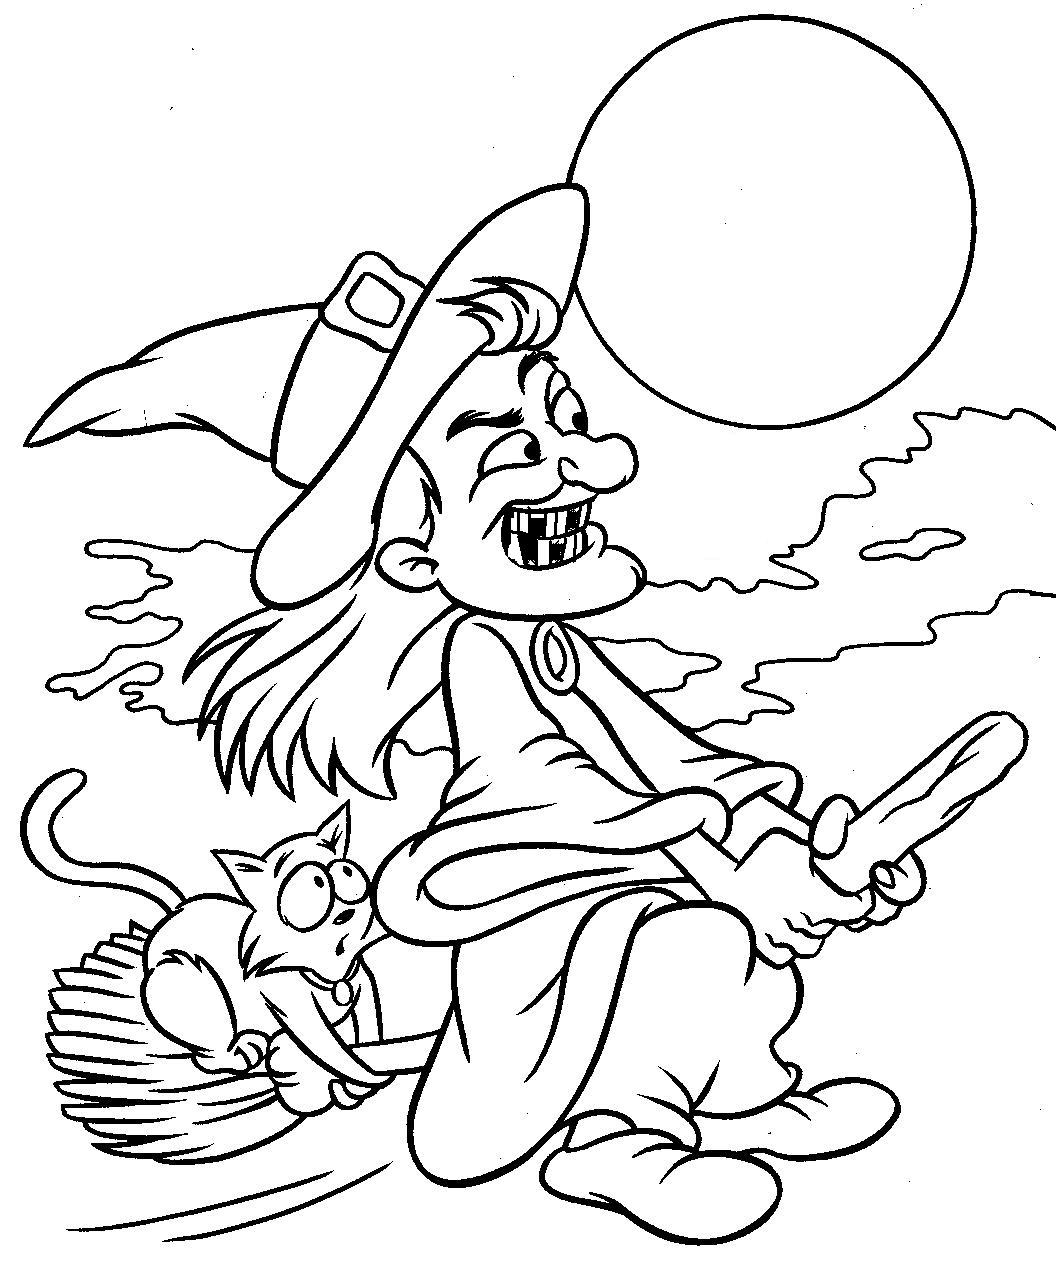 Download Halloween Coloring Page For Preschool - 304+ Best Free SVG File for Cricut, Silhouette and Other Machine